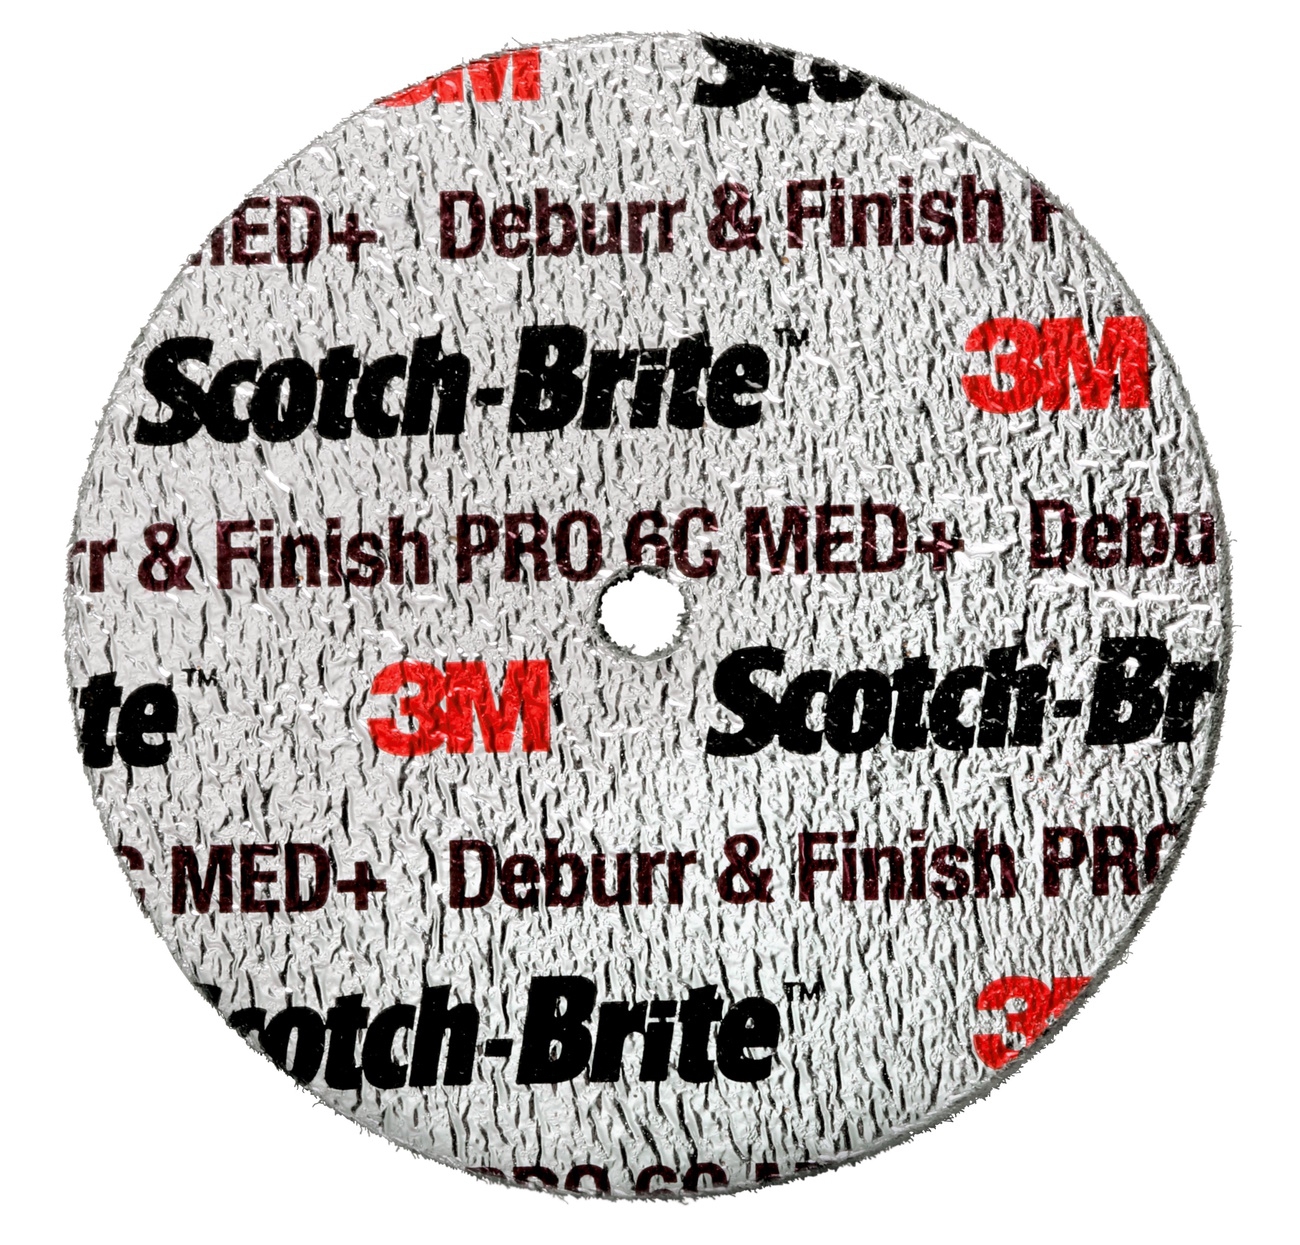 3M Scotch-Brite Deburr and Finish PRO compact disc DP-UW, 50 mm x 6.35 mm x 6.35 mm, 6C MED+